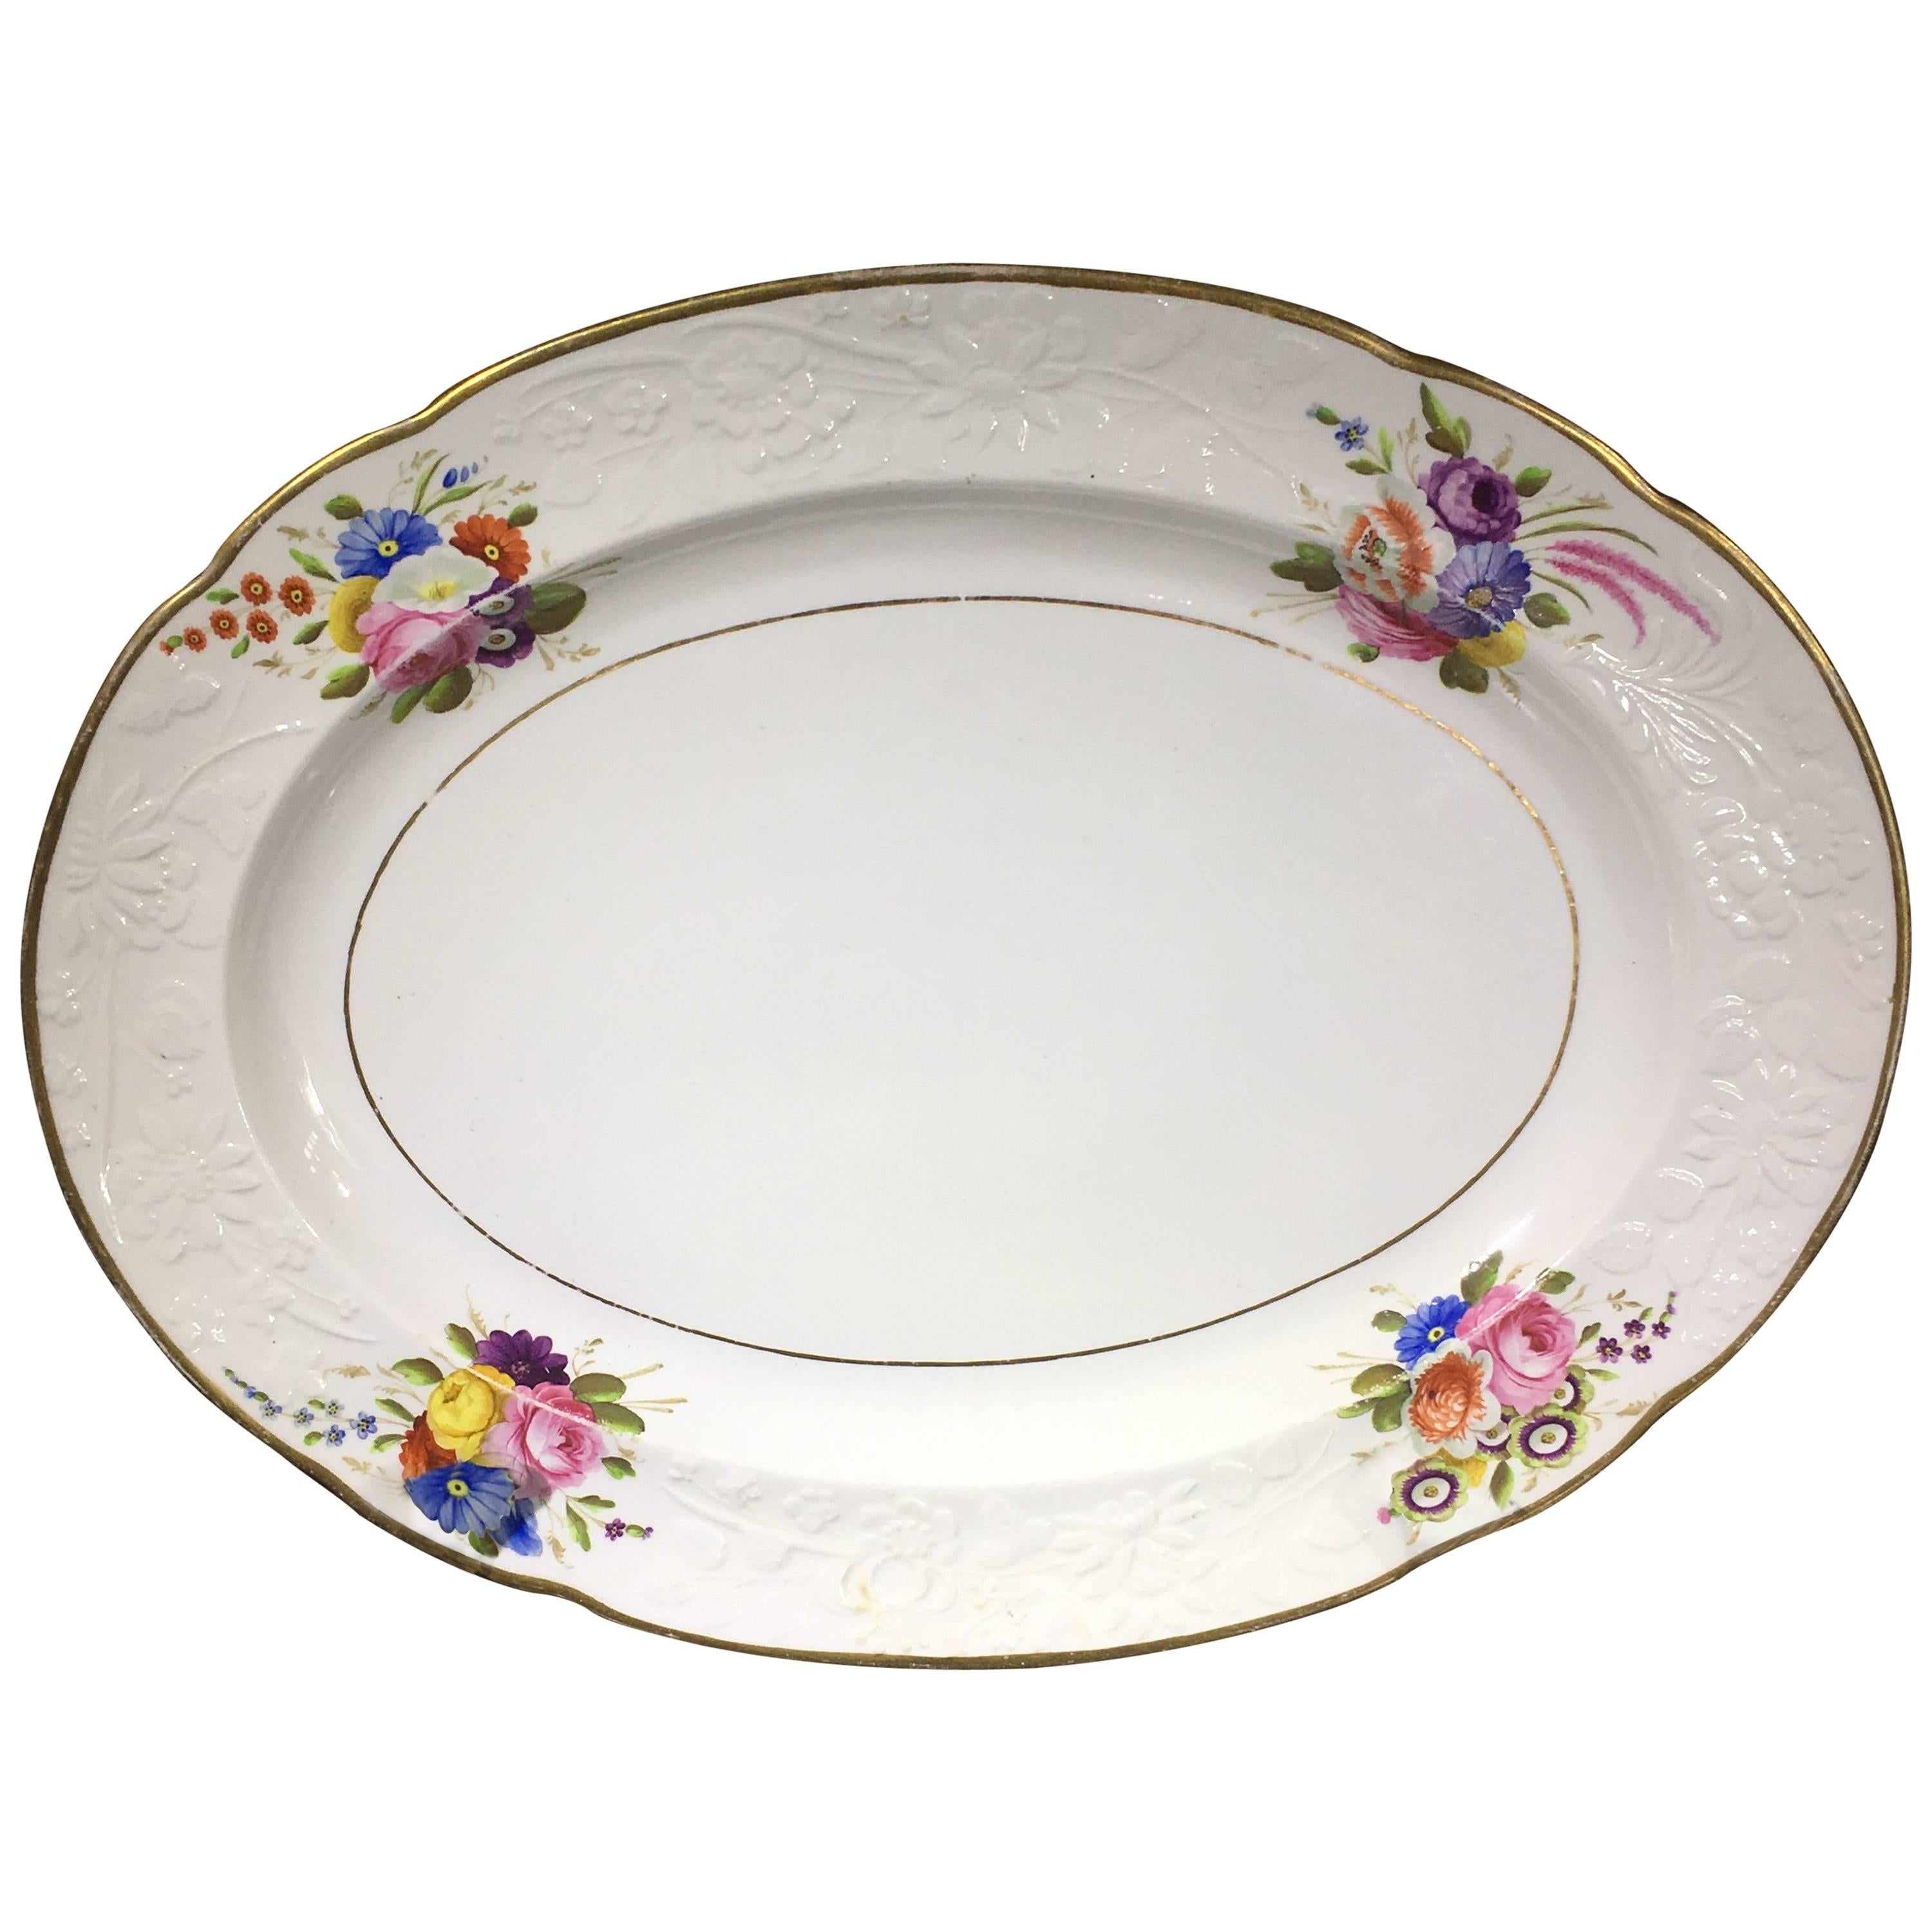 Spode Oval Platter, Moulded and Painted with Flowers Pat. 1943, circa 1815 For Sale